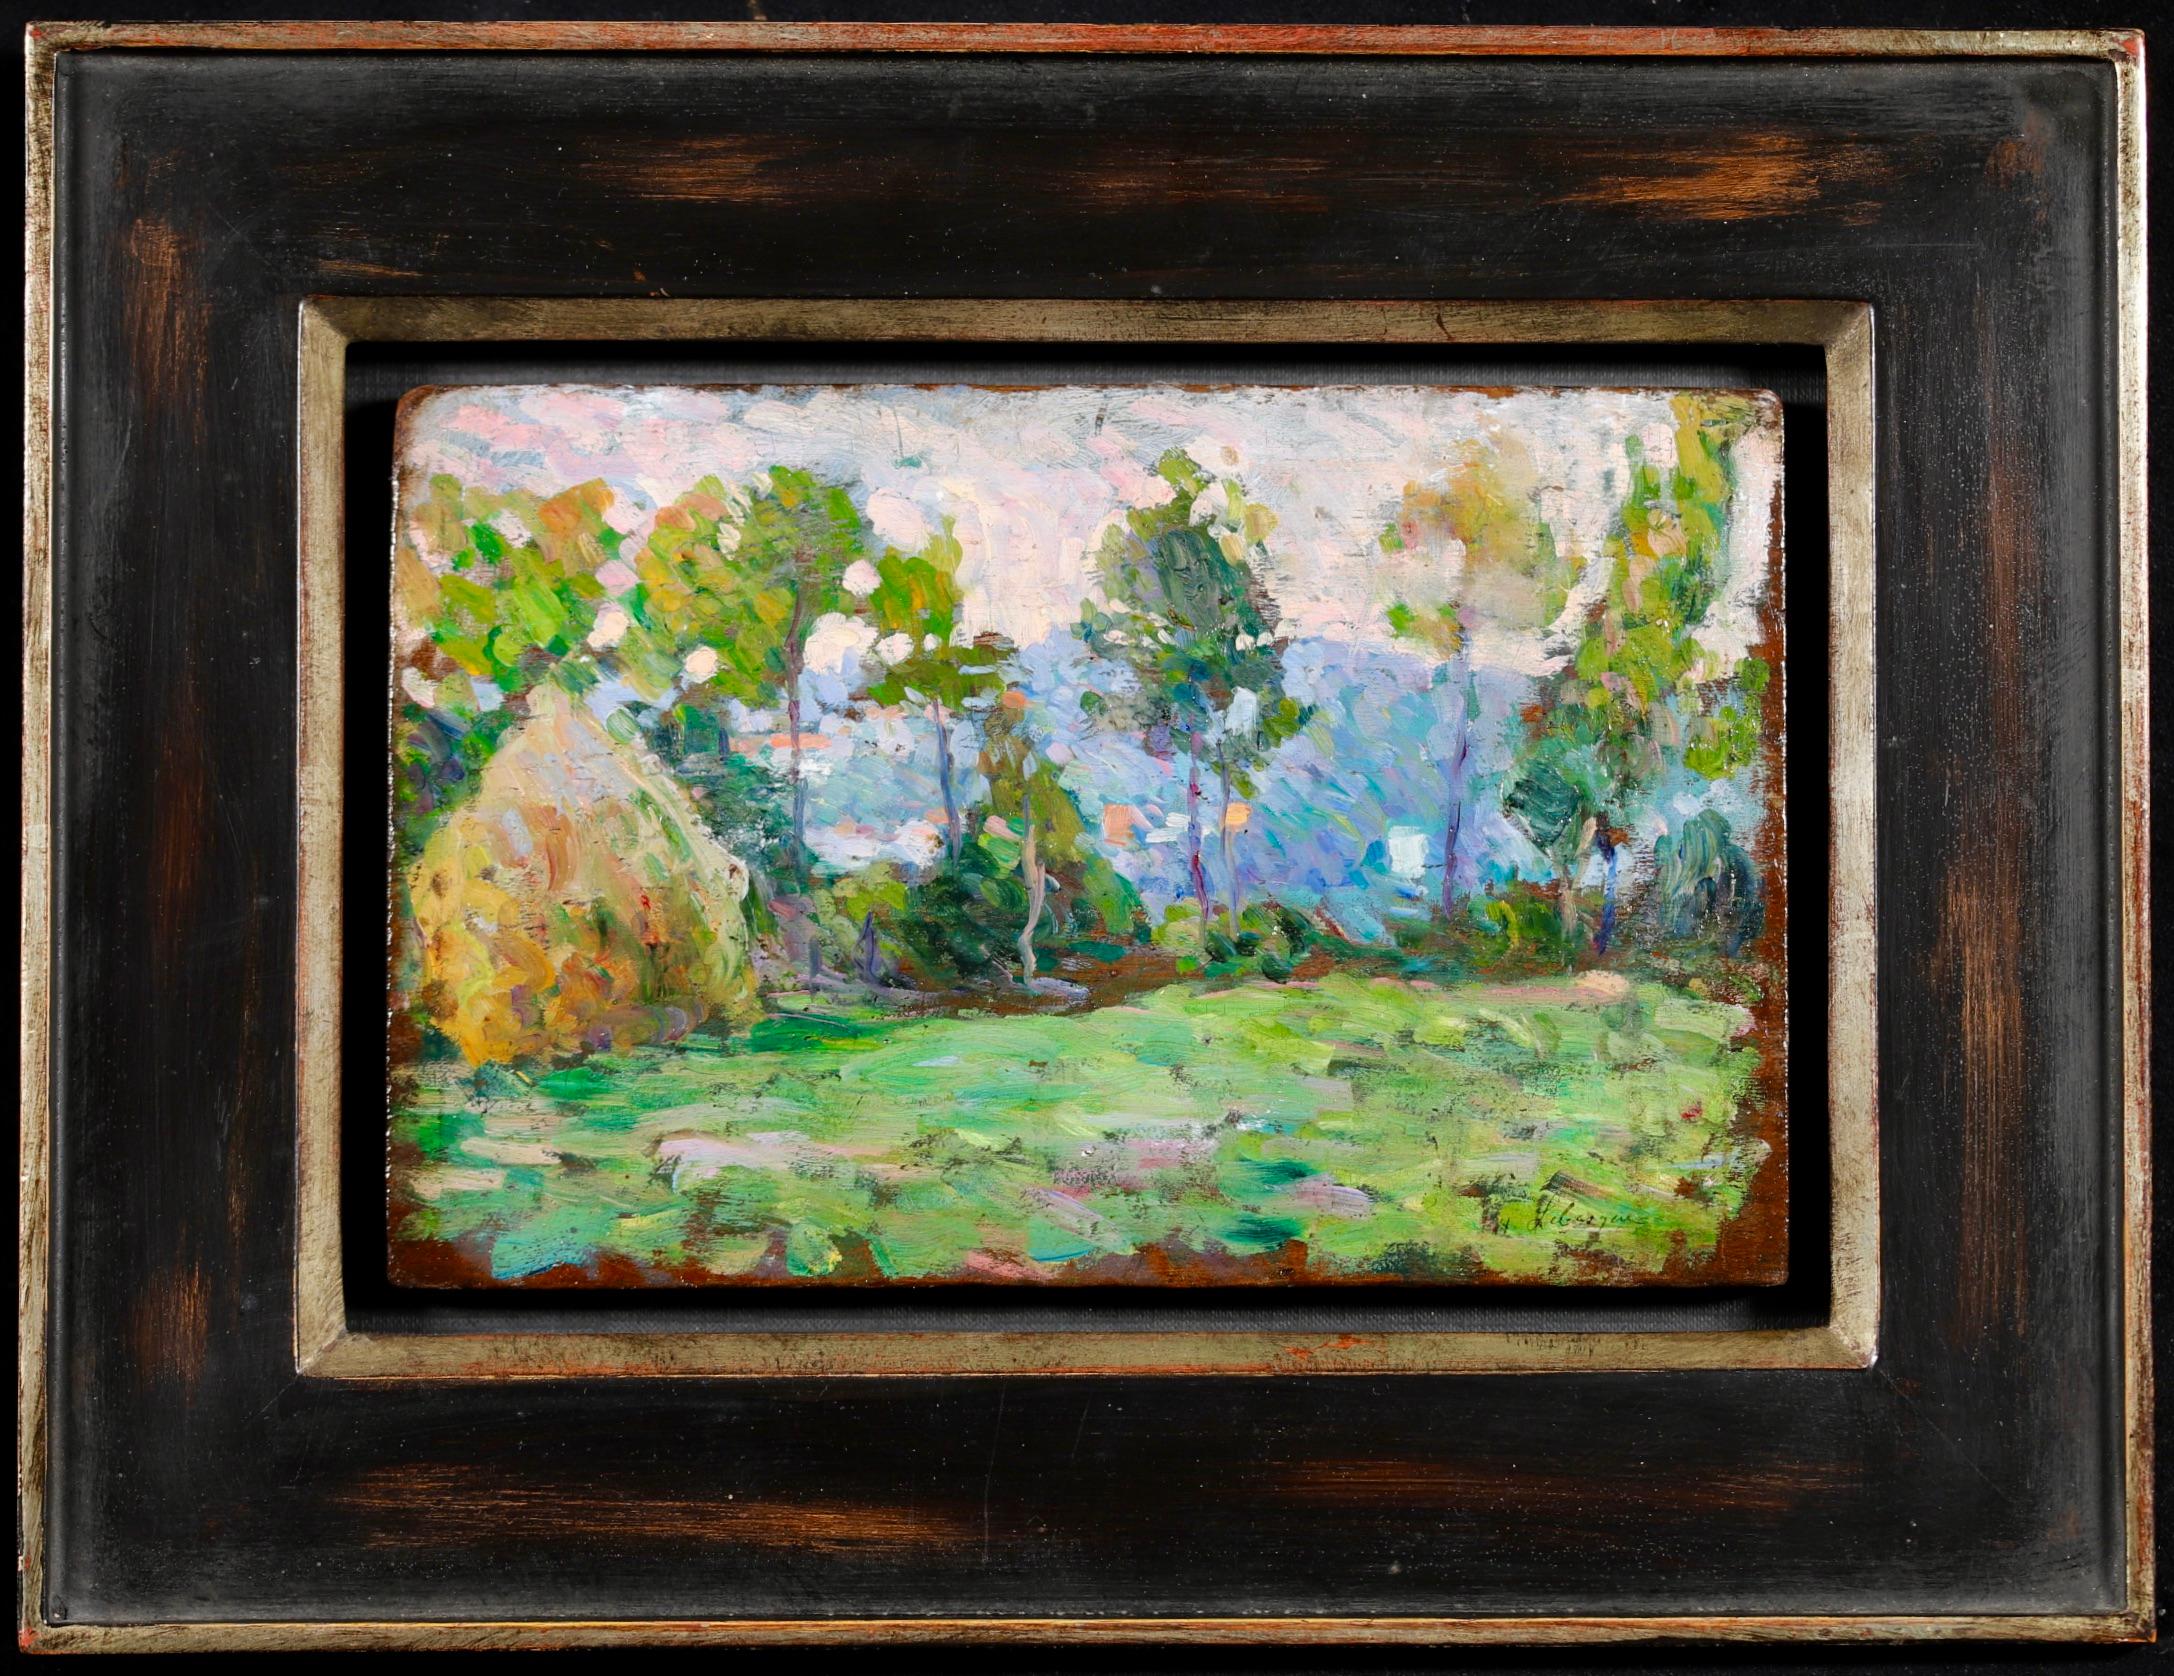 Signed oil on panel landscape circa 1900 by French post impressionist painter Henri Lebasque. The work depicts a field lined with trees with a haystack to the left. There is a view of the mountains beyond. This work is a study for 